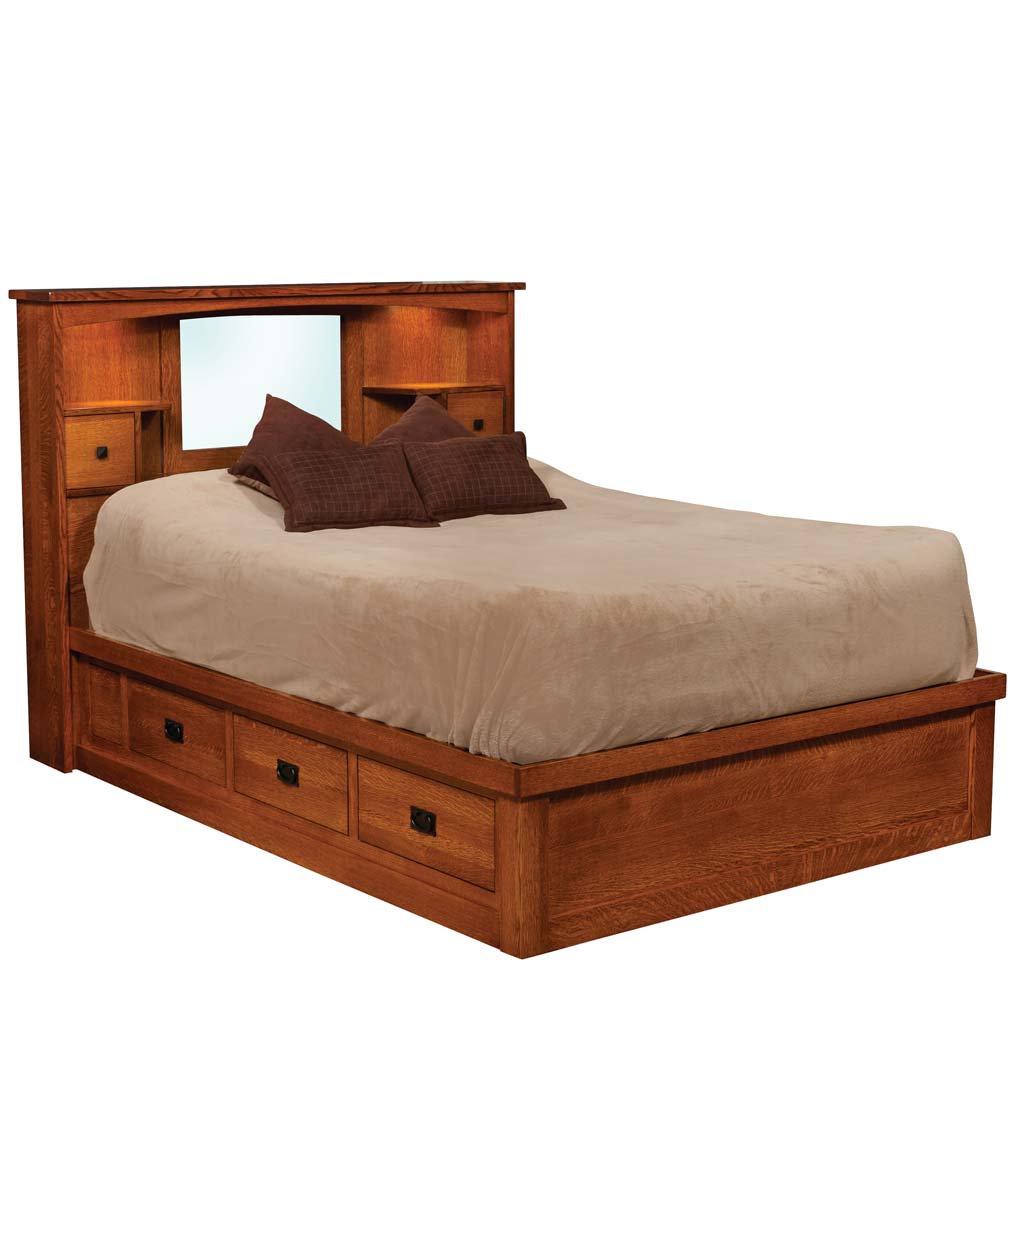 Captains Mission Bed Amish Direct, King Size Mission Style Bed Frame